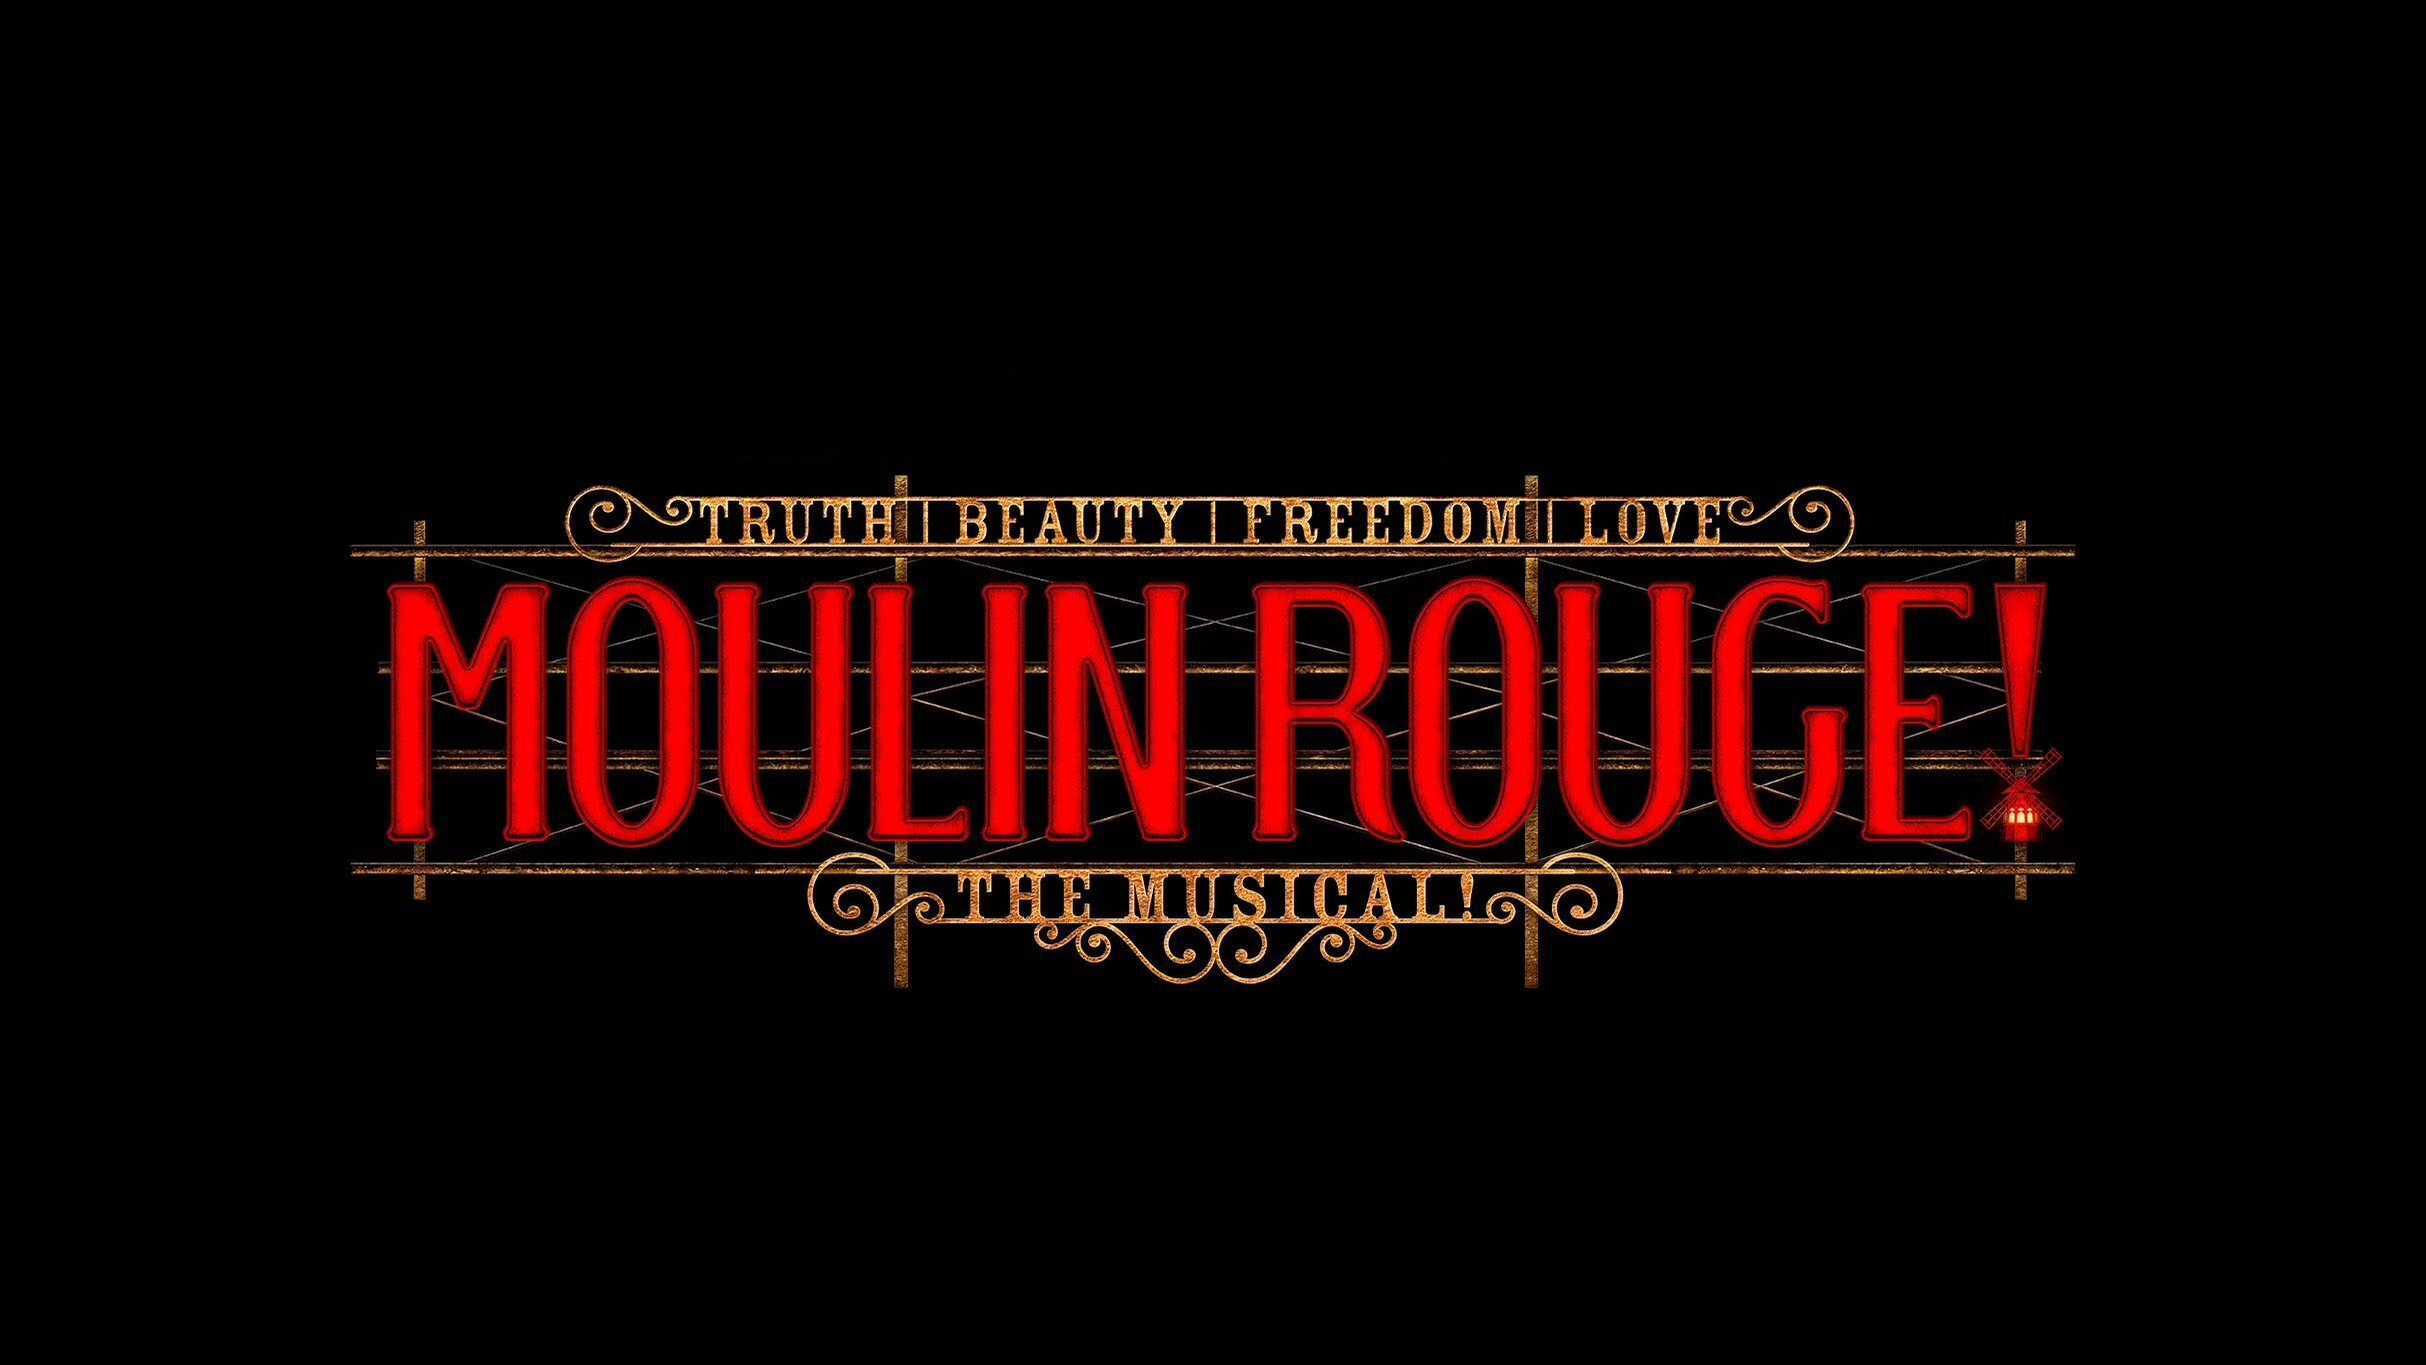 Moulin Rouge (Touring) in Kansas City promo photo for Special presale offer code